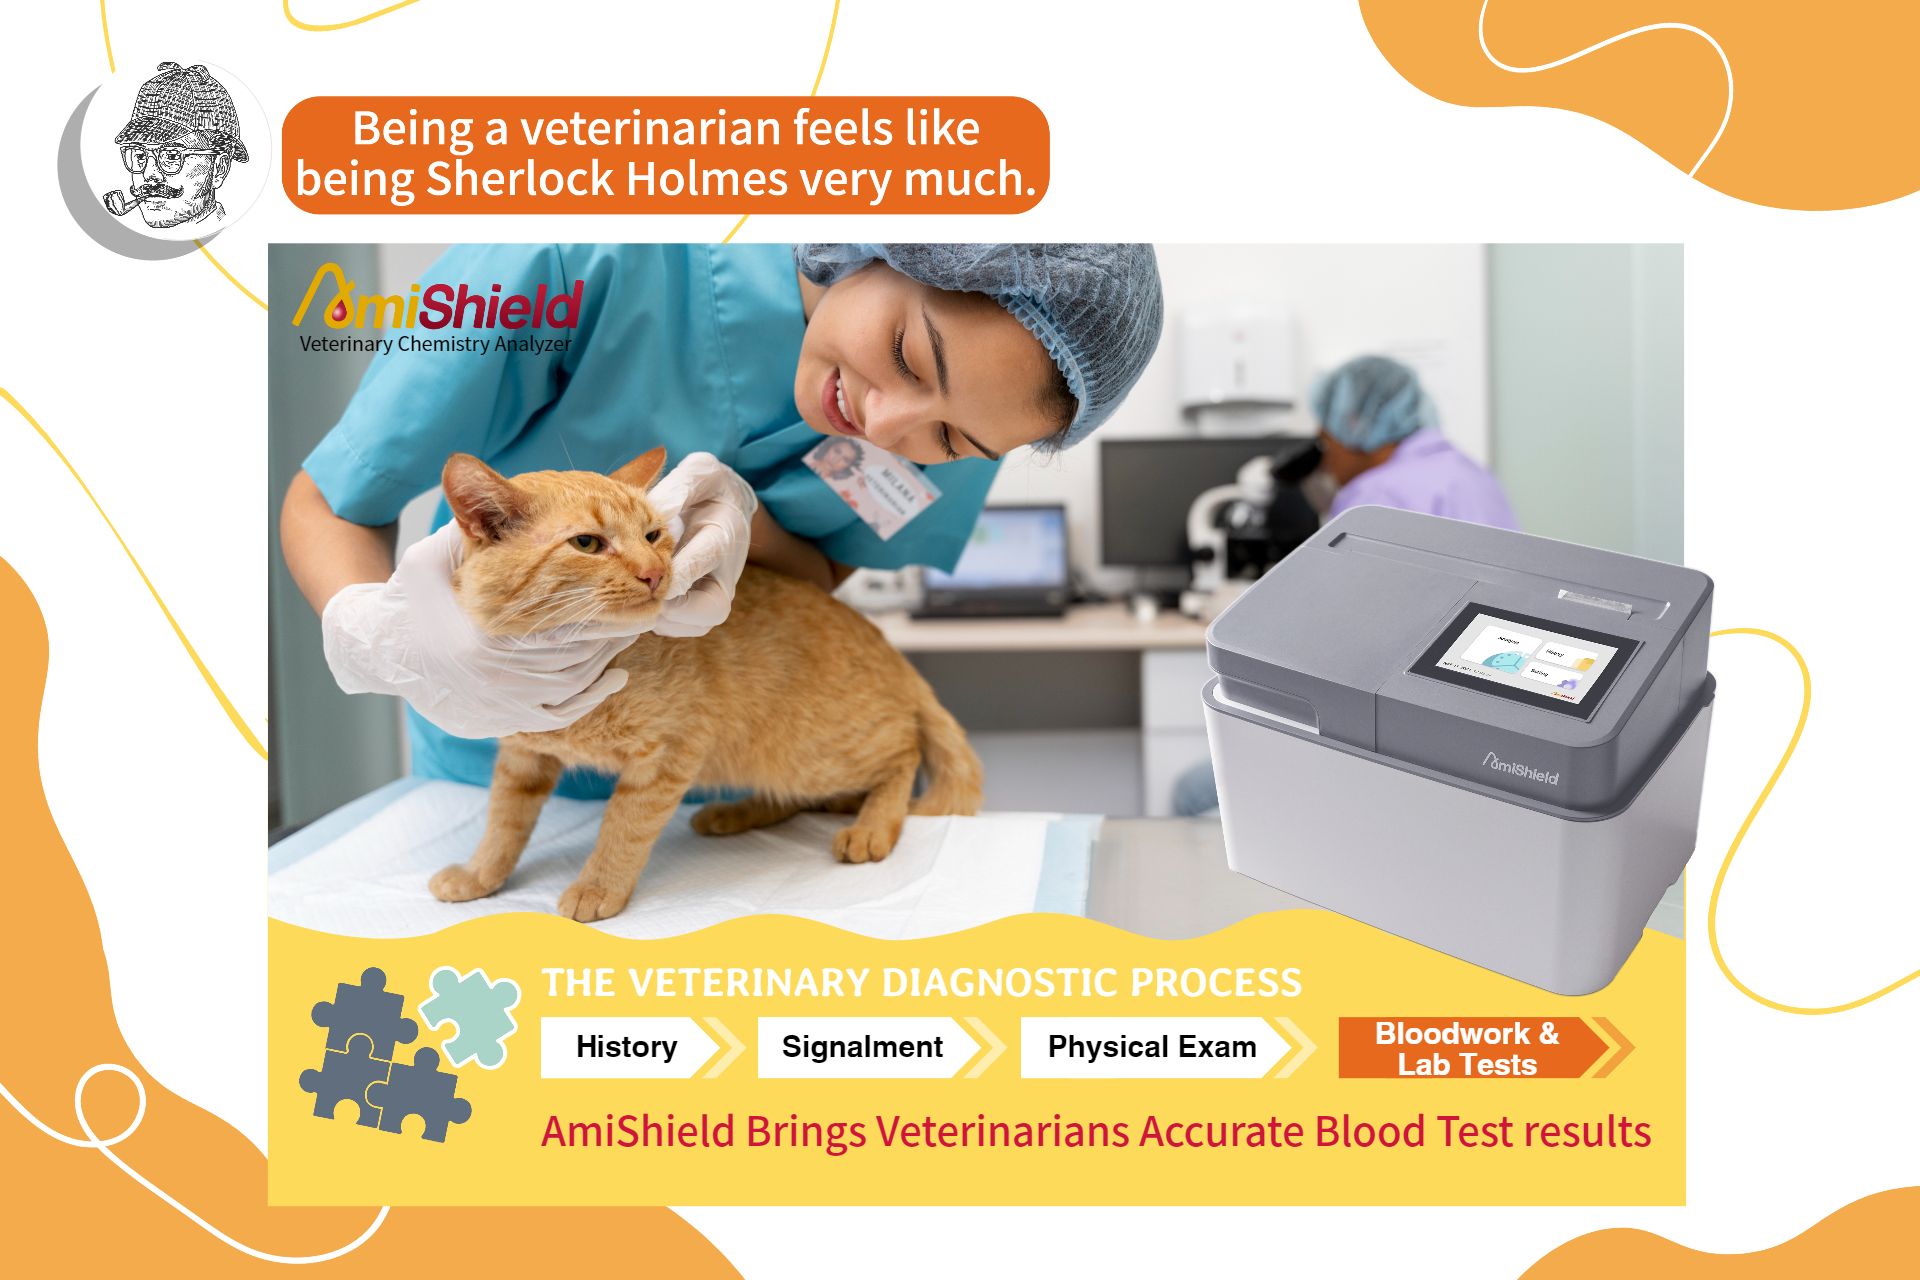 AmiShield, a total chemistry diagnostic solution for the veterinarians!